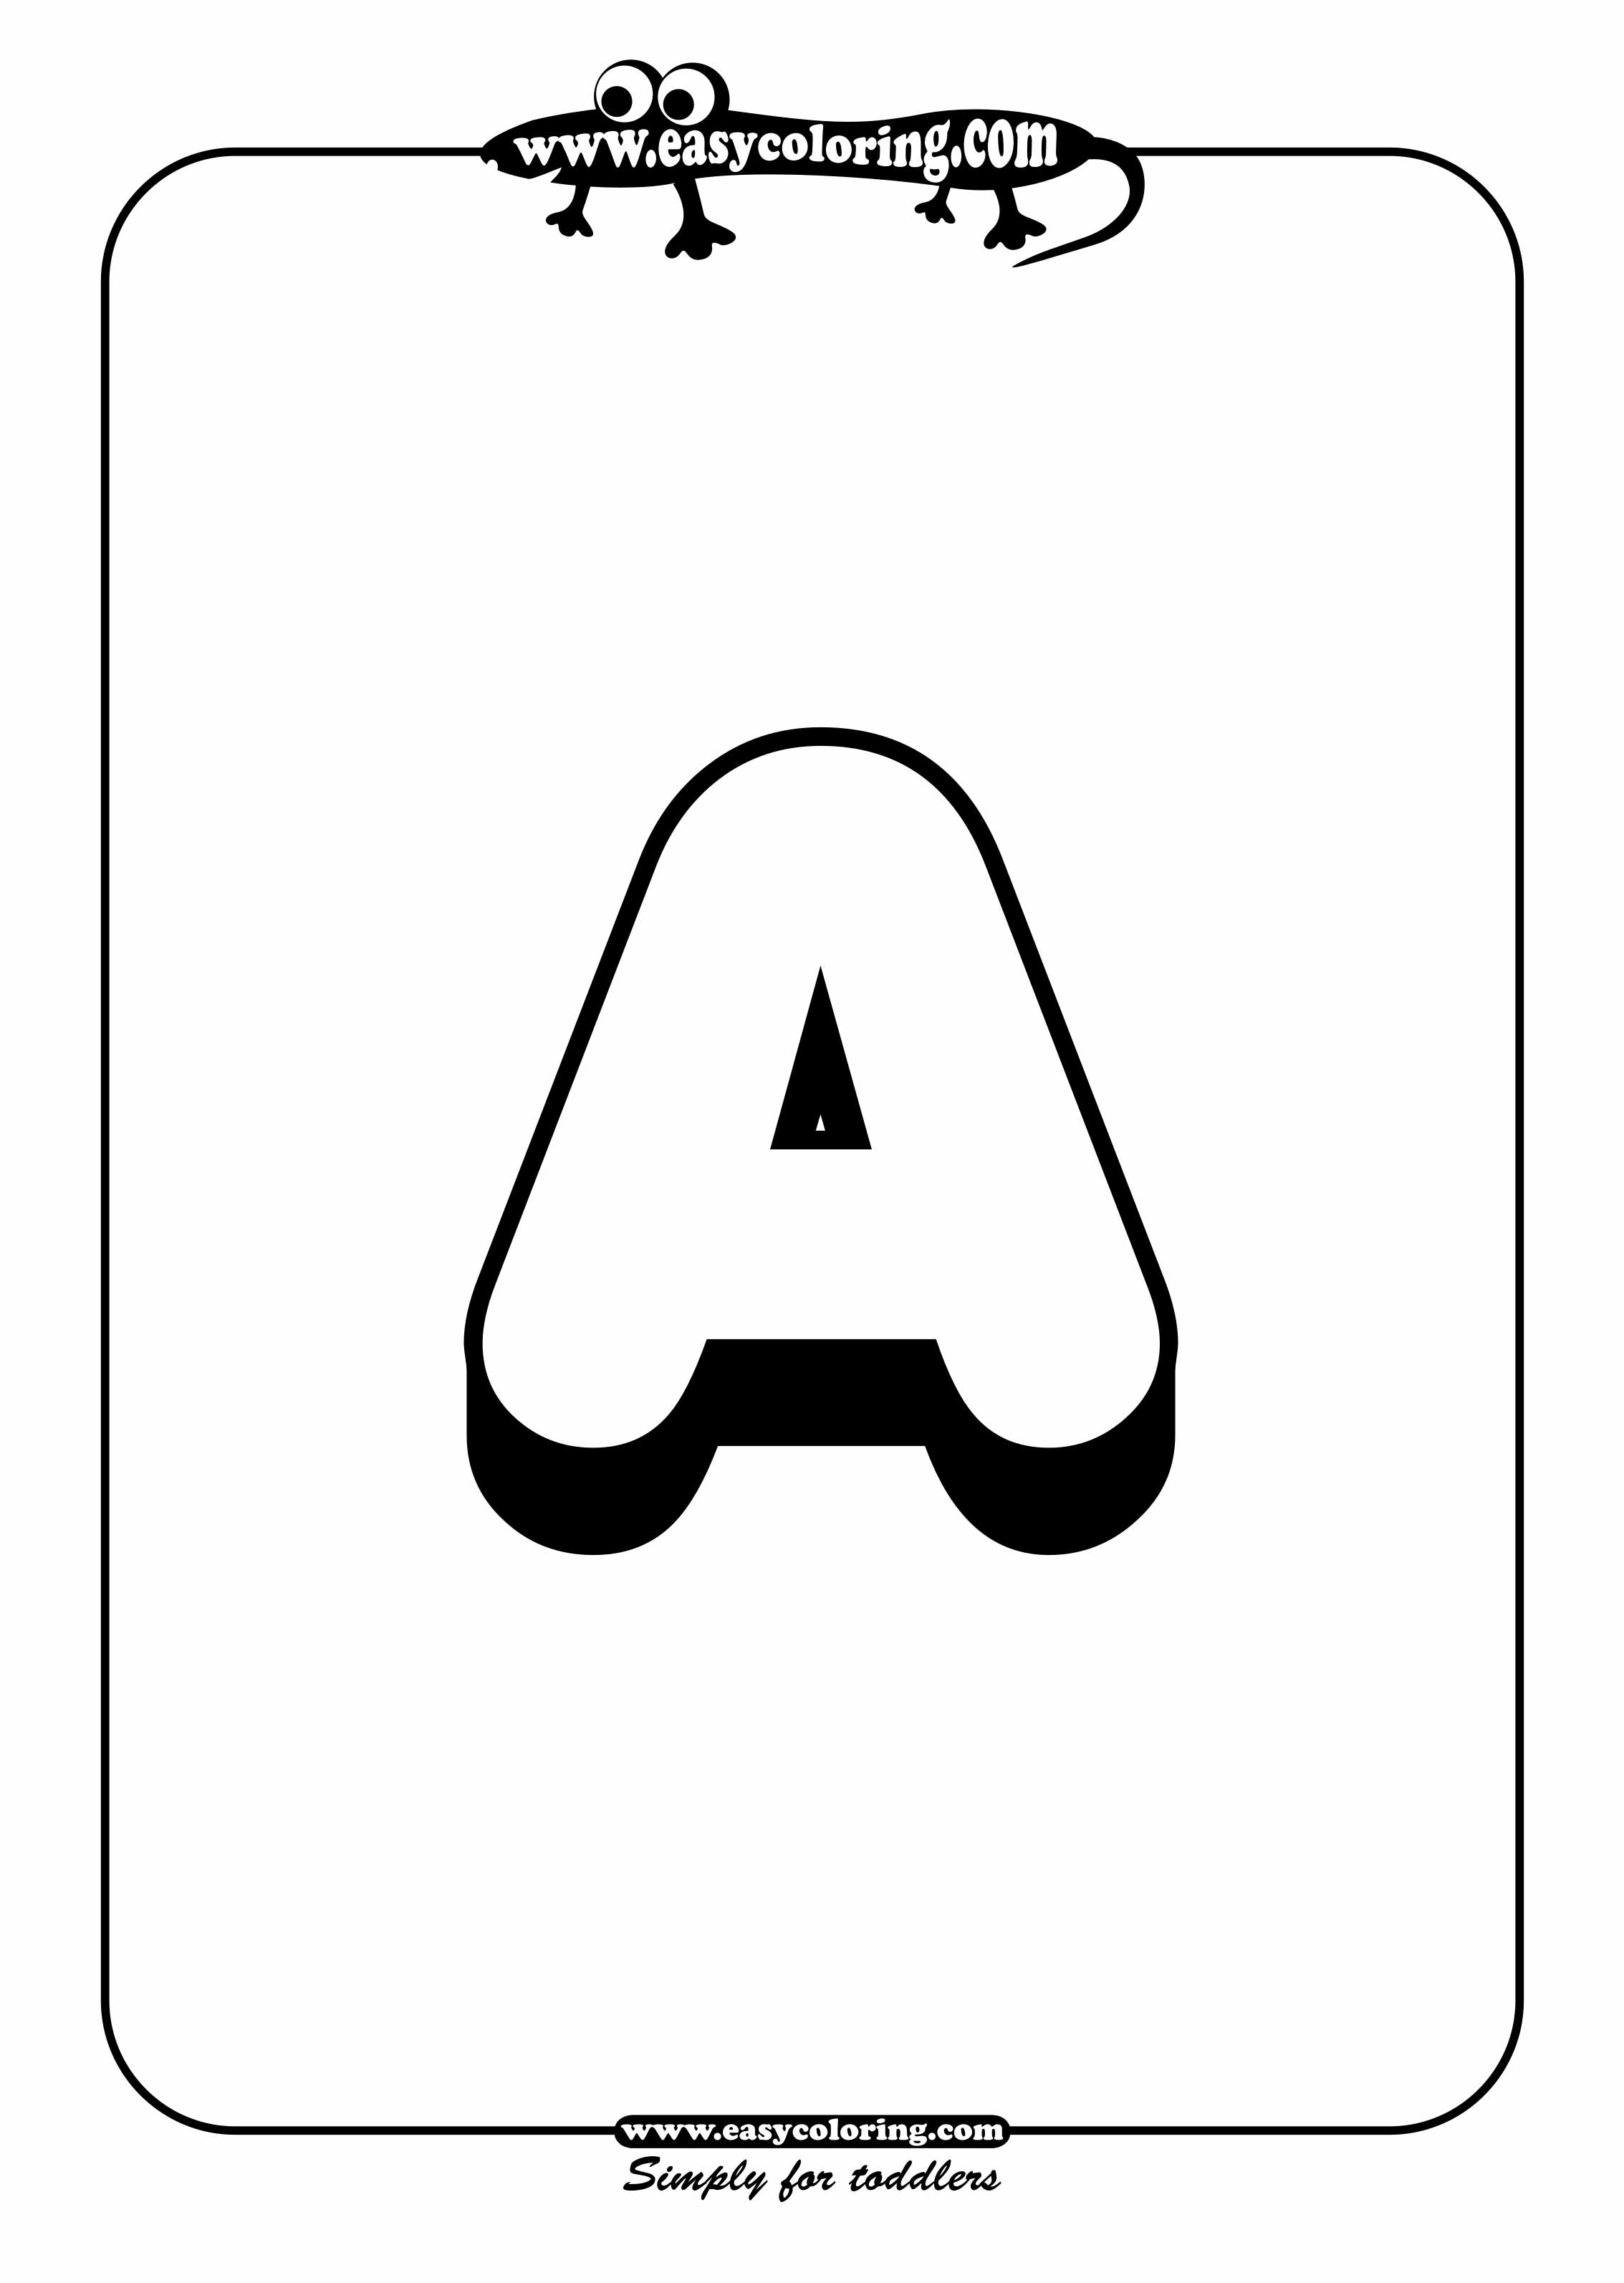 Coloring page: Alphabet (Educational) #125041 - Printable coloring pages